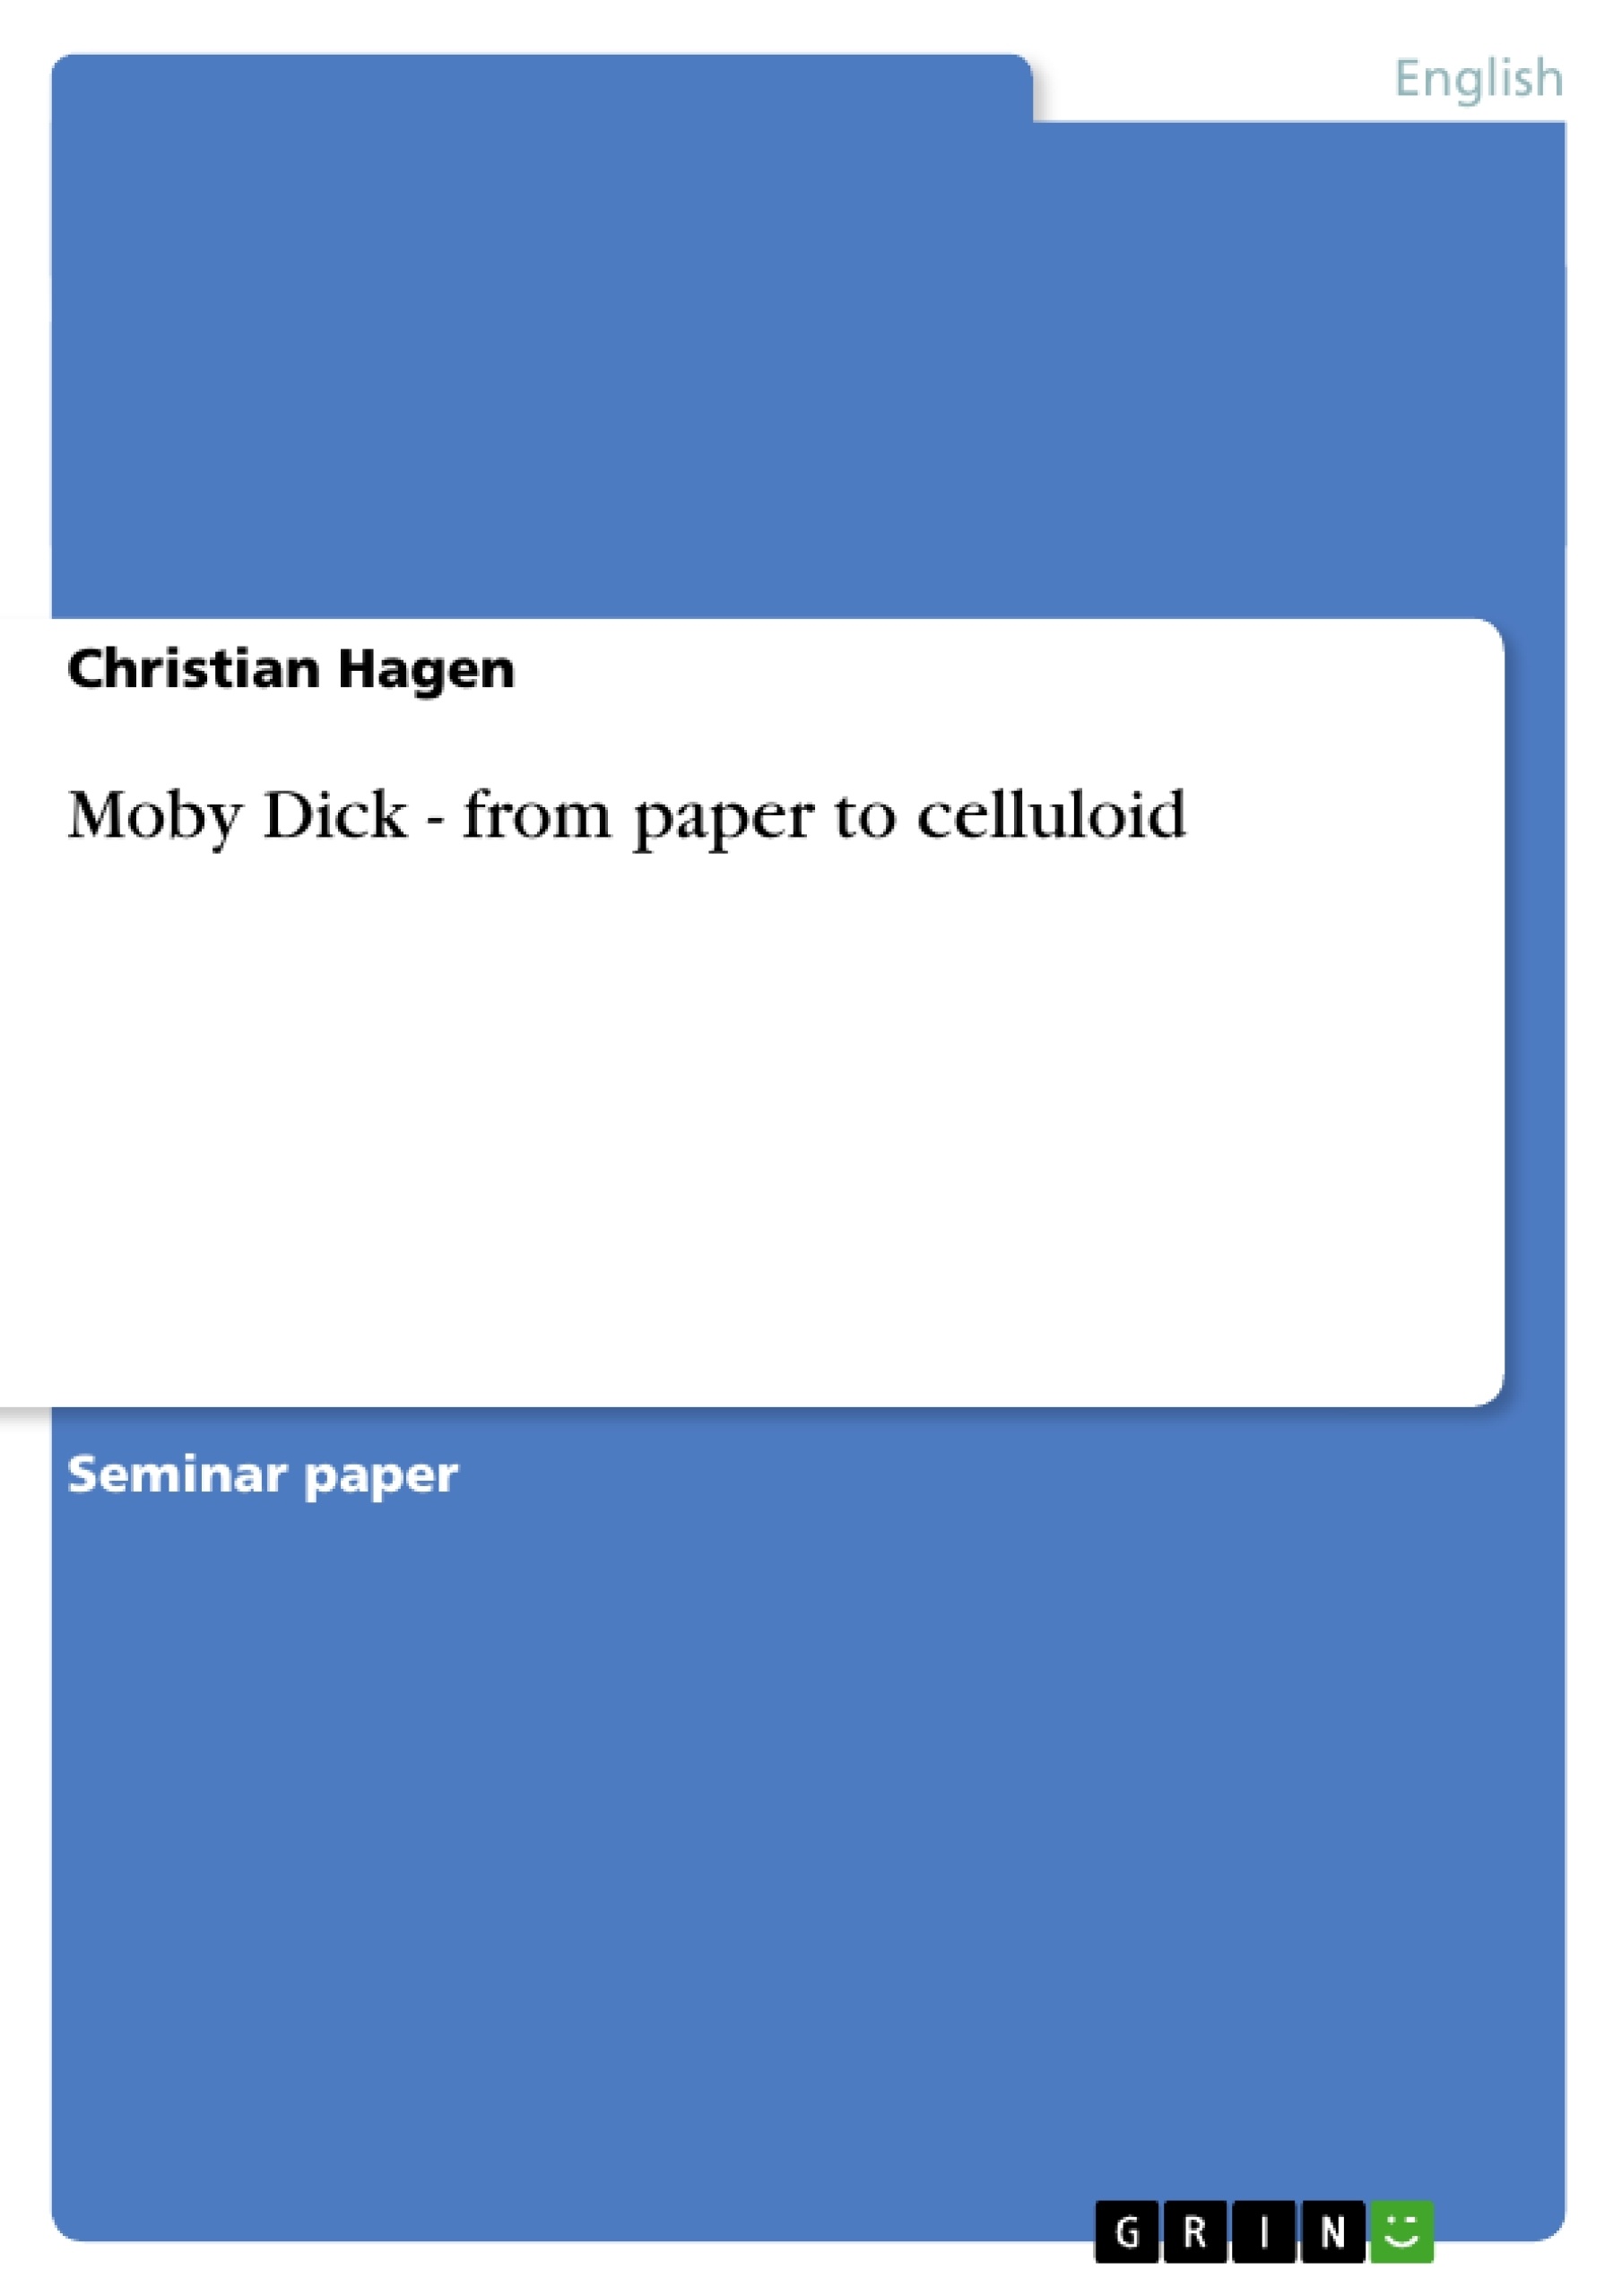 Реферат: Moby Dick 2 Essay Research Paper Moby